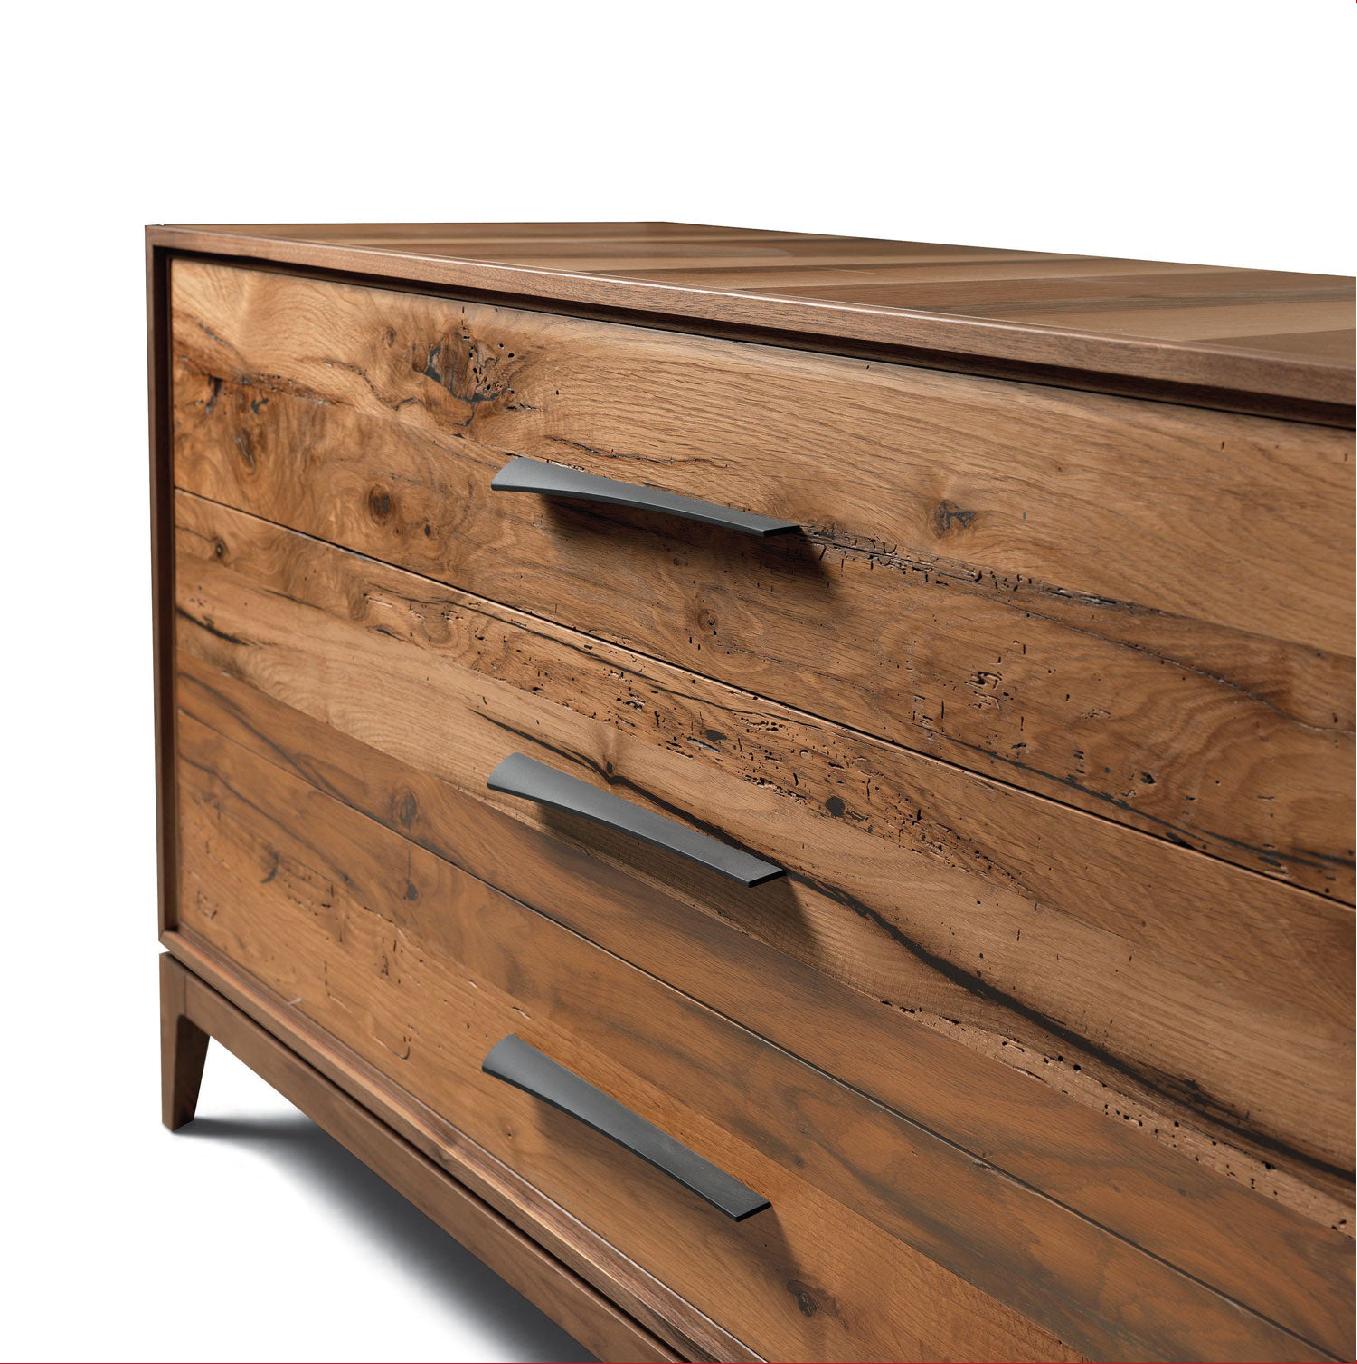 A high-end contemporary dresser crafted in Italy.
Enhancing the grain of the premium walnut, the precise oil finish is the result of craftsmanship exacted by hand.
The three drawers are in solid old oak with oil finish while the original form of the